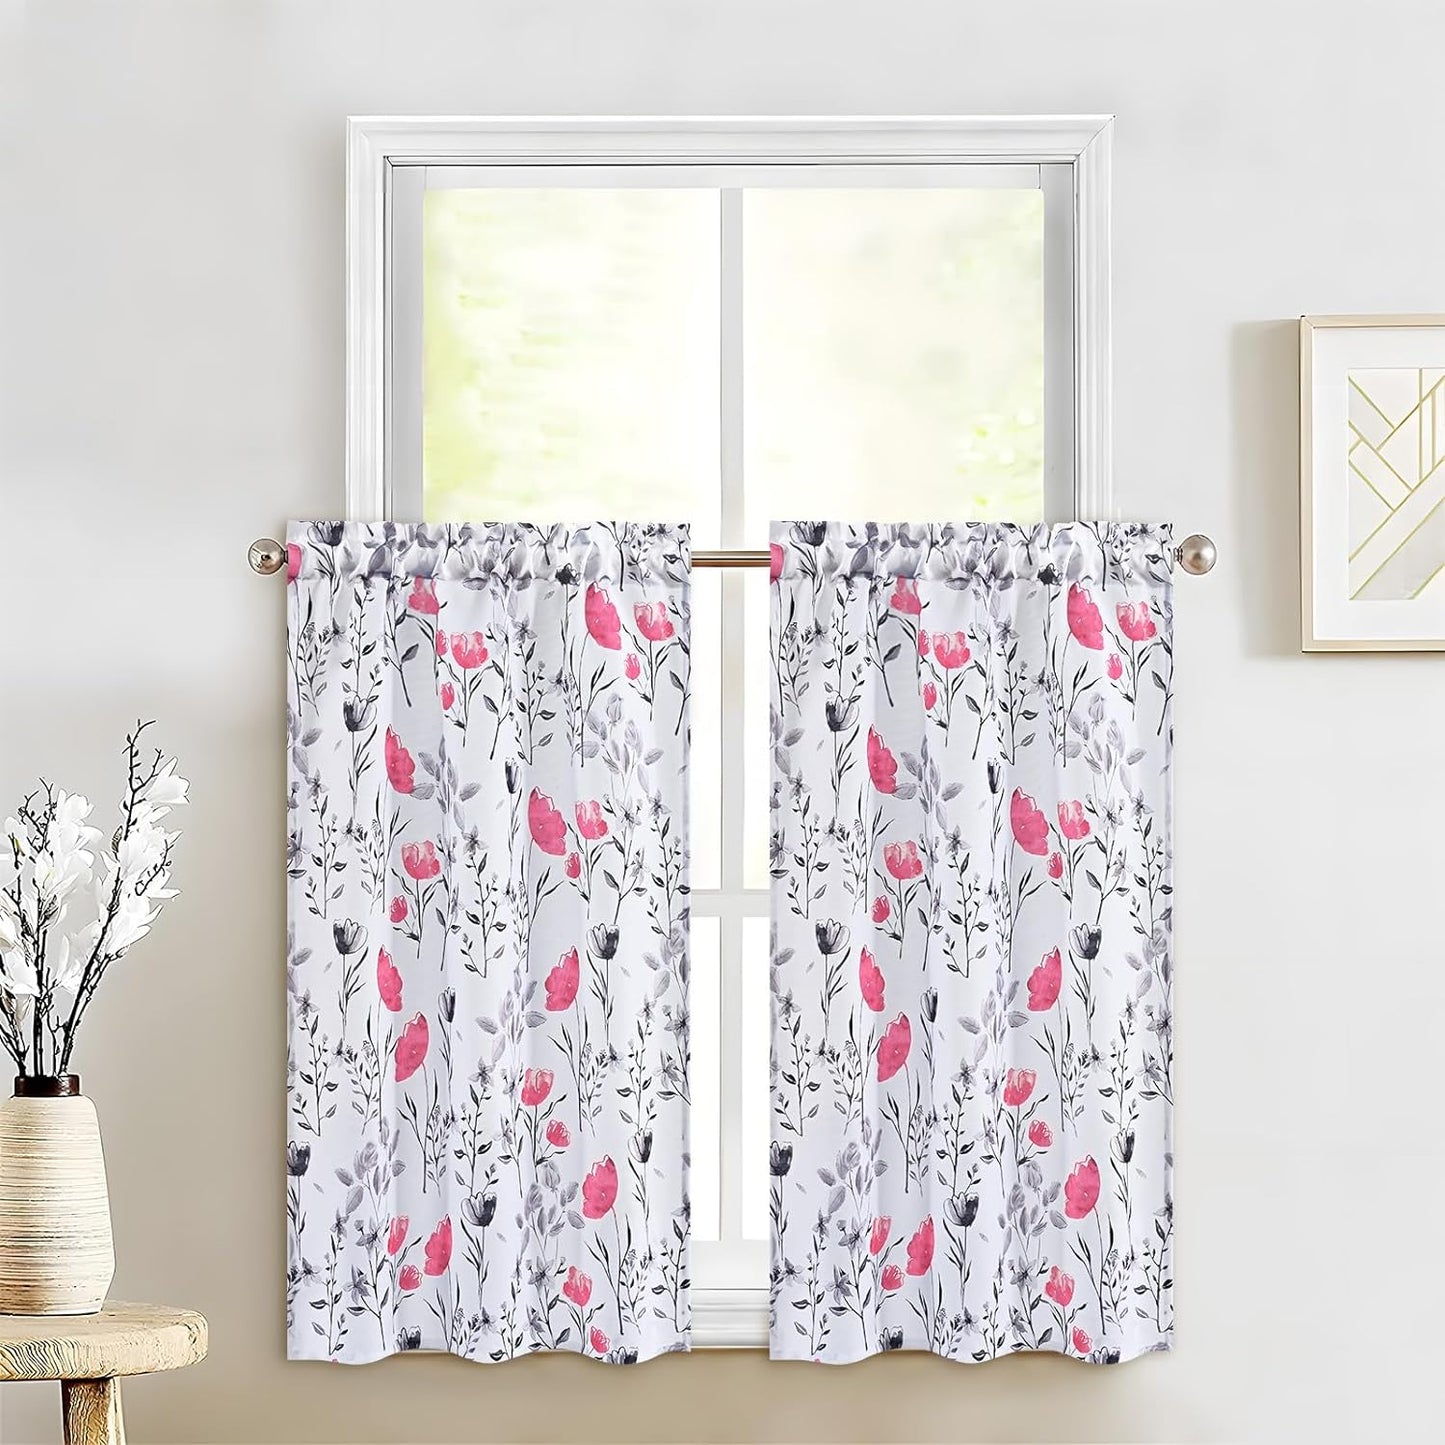 Likiyol Floral Kithchen Curtains 36 Inch Watercolor Flower Leaves Tier Curtains, Yellow and Gray Floral Cafe Curtains, Rod Pocket Small Window Curtain for Cafe Bathroom Bedroom Drapes  Likiyol Pink 36"L X 26"W 